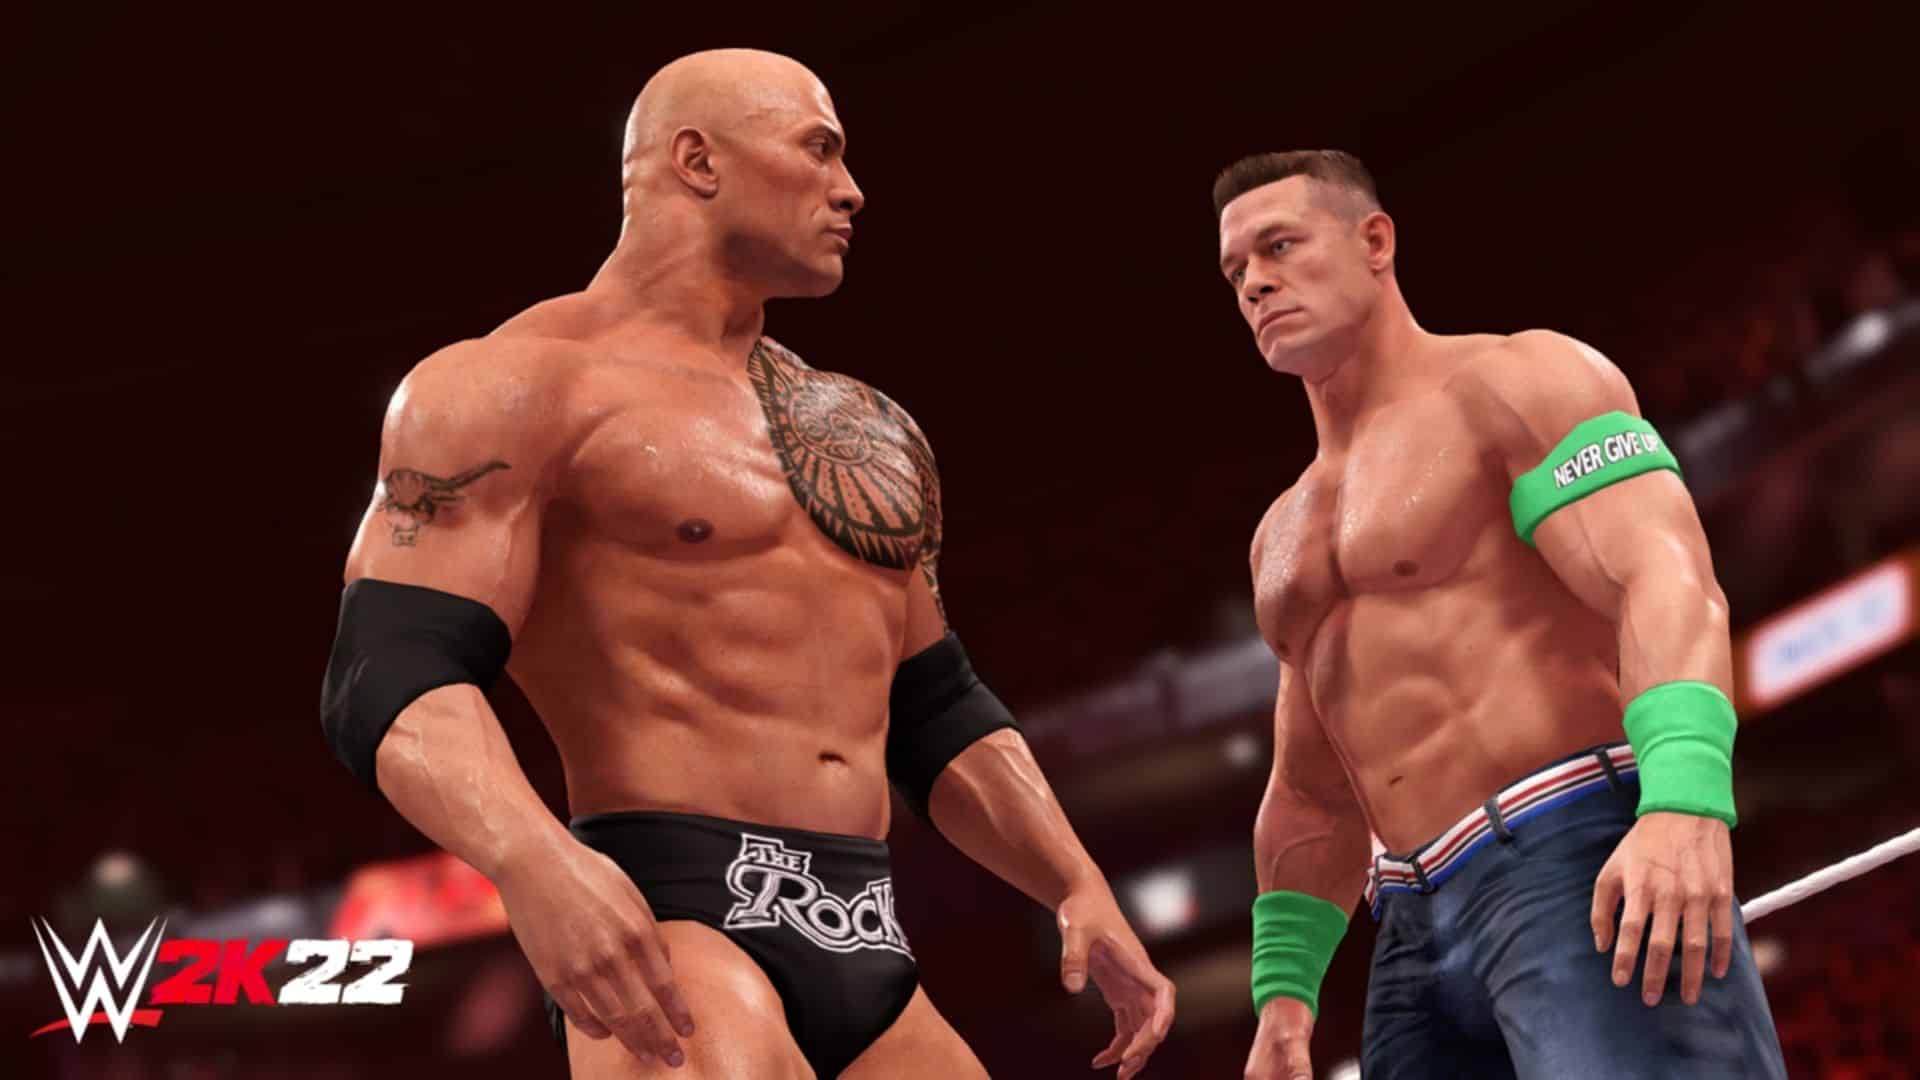 WWE 2K22' Review: A Serious Contender with Some Old Injuries